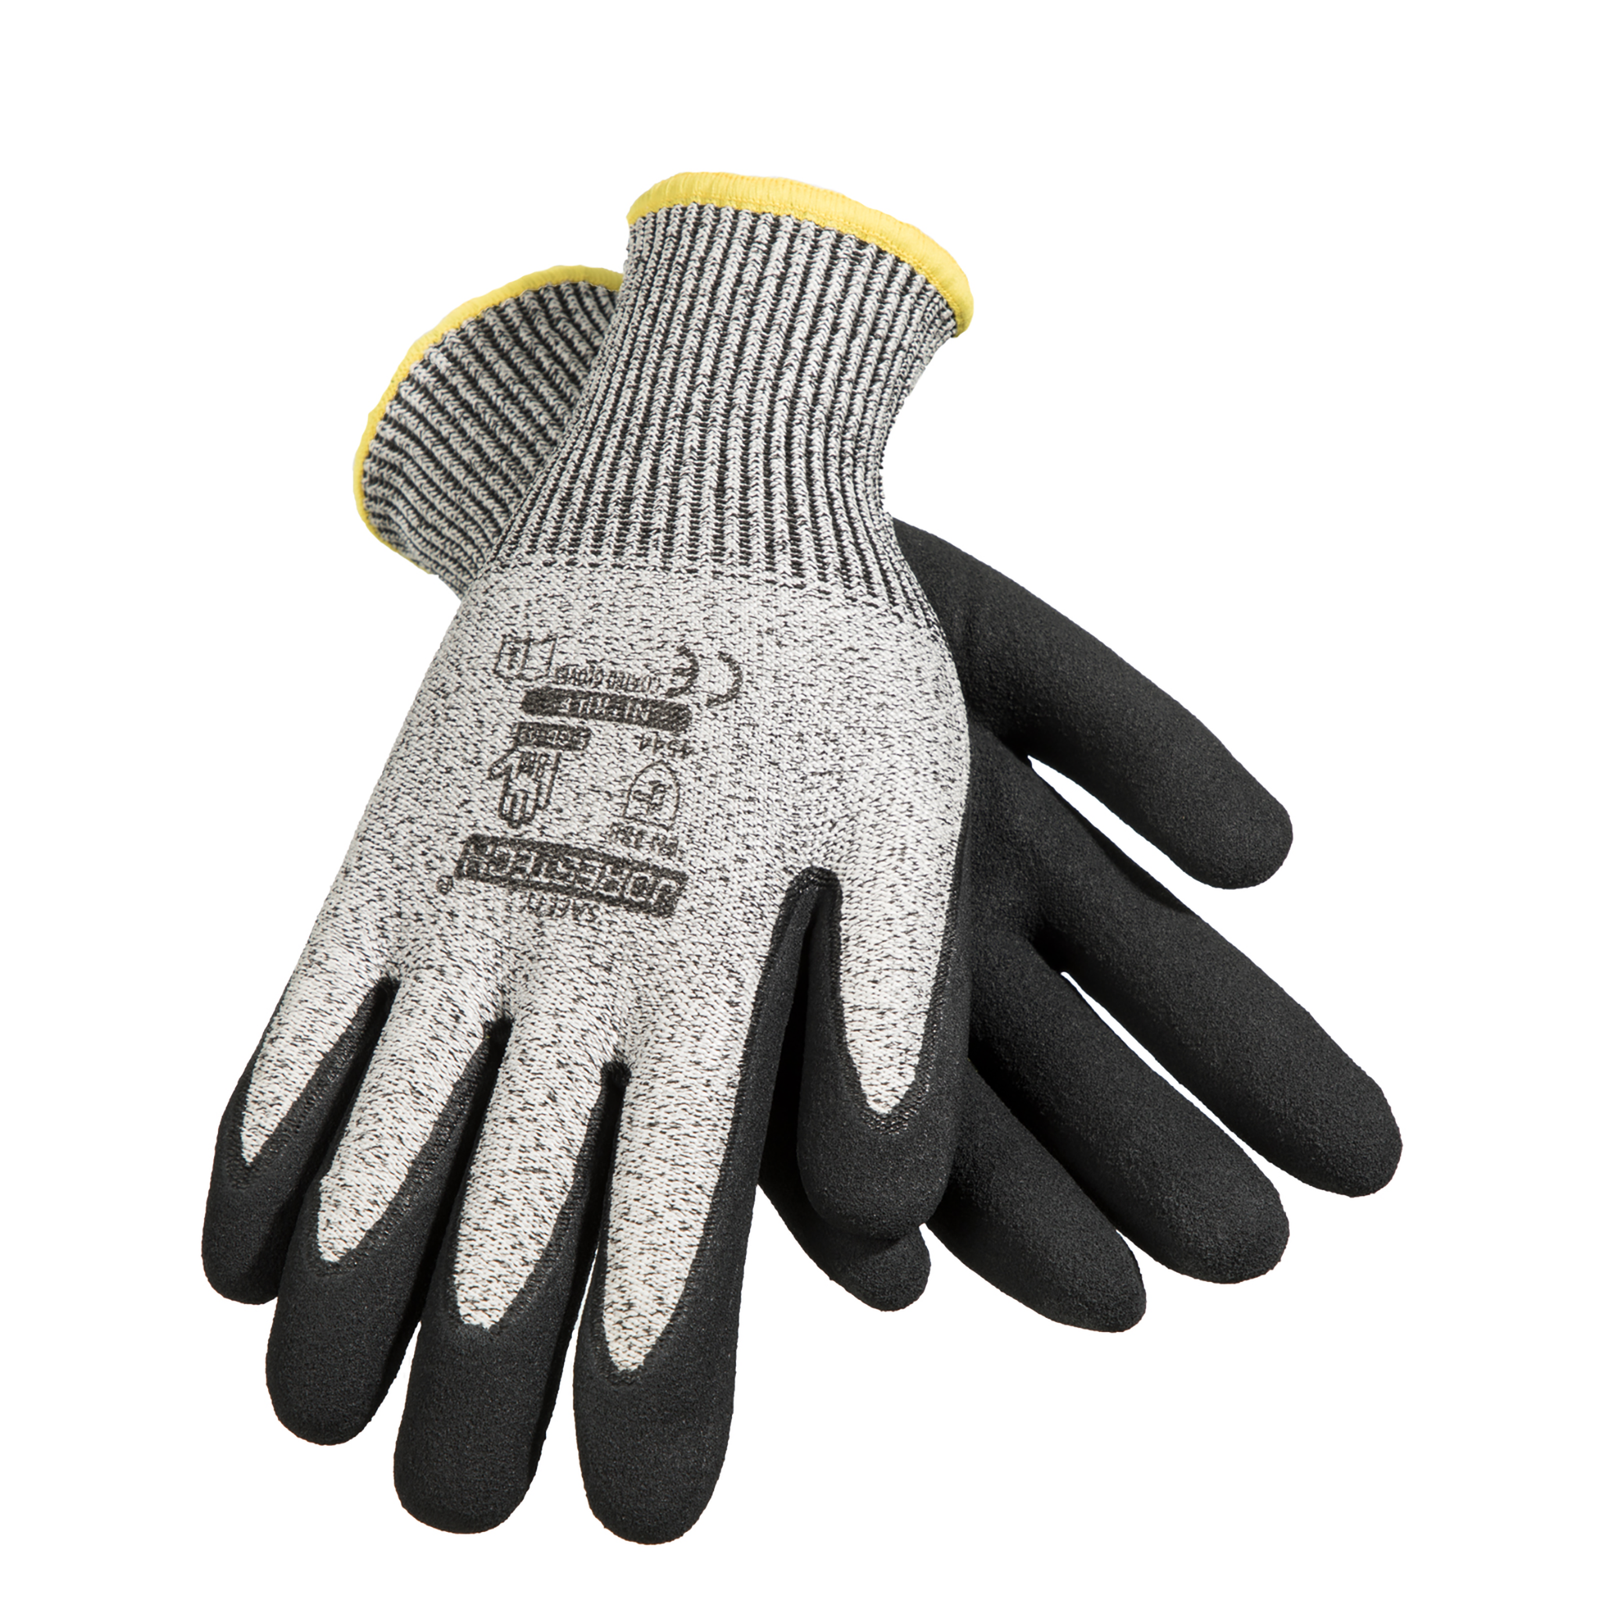 One pair of the JORESTECH cut resistant safety work gloves with nitrile dipped black palms 